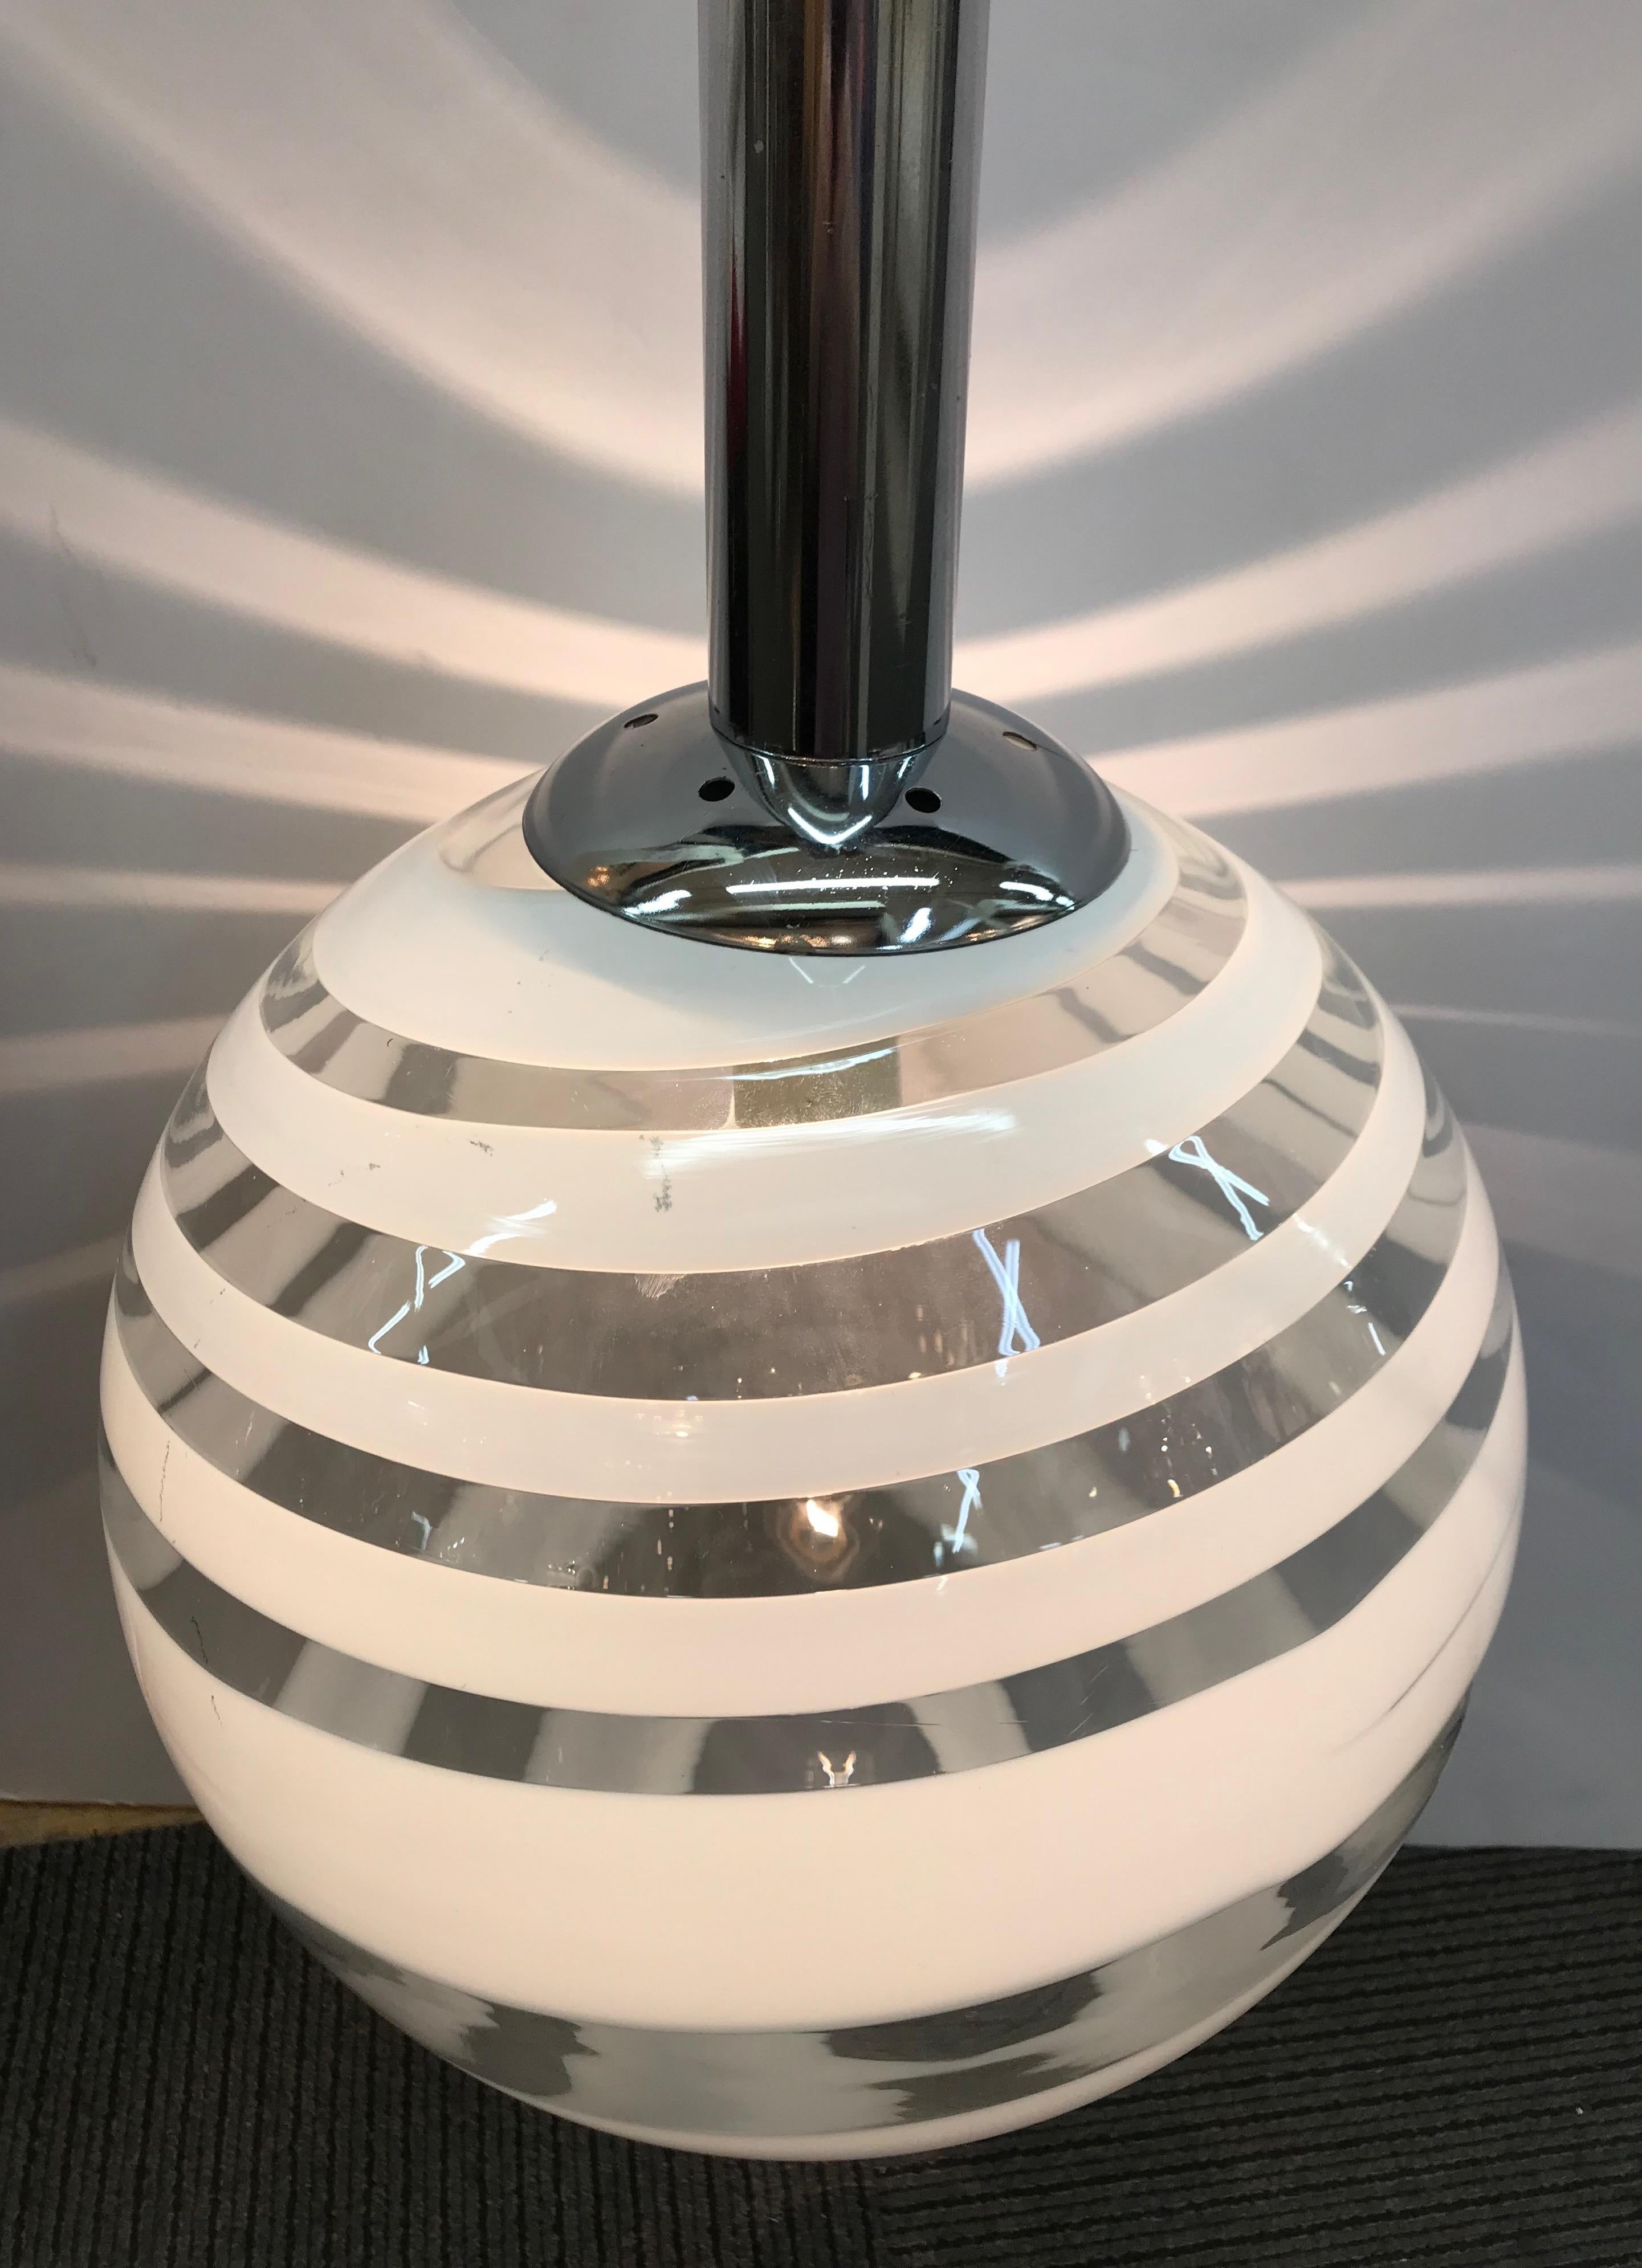 A beautiful Murano, Italy handblown clear with white spiral glass globe shade pendant light, circa 1970. Original chrome tube top mount that supports the glass globe shade. The pendant is suspended on steel cord with white electrical corn next to